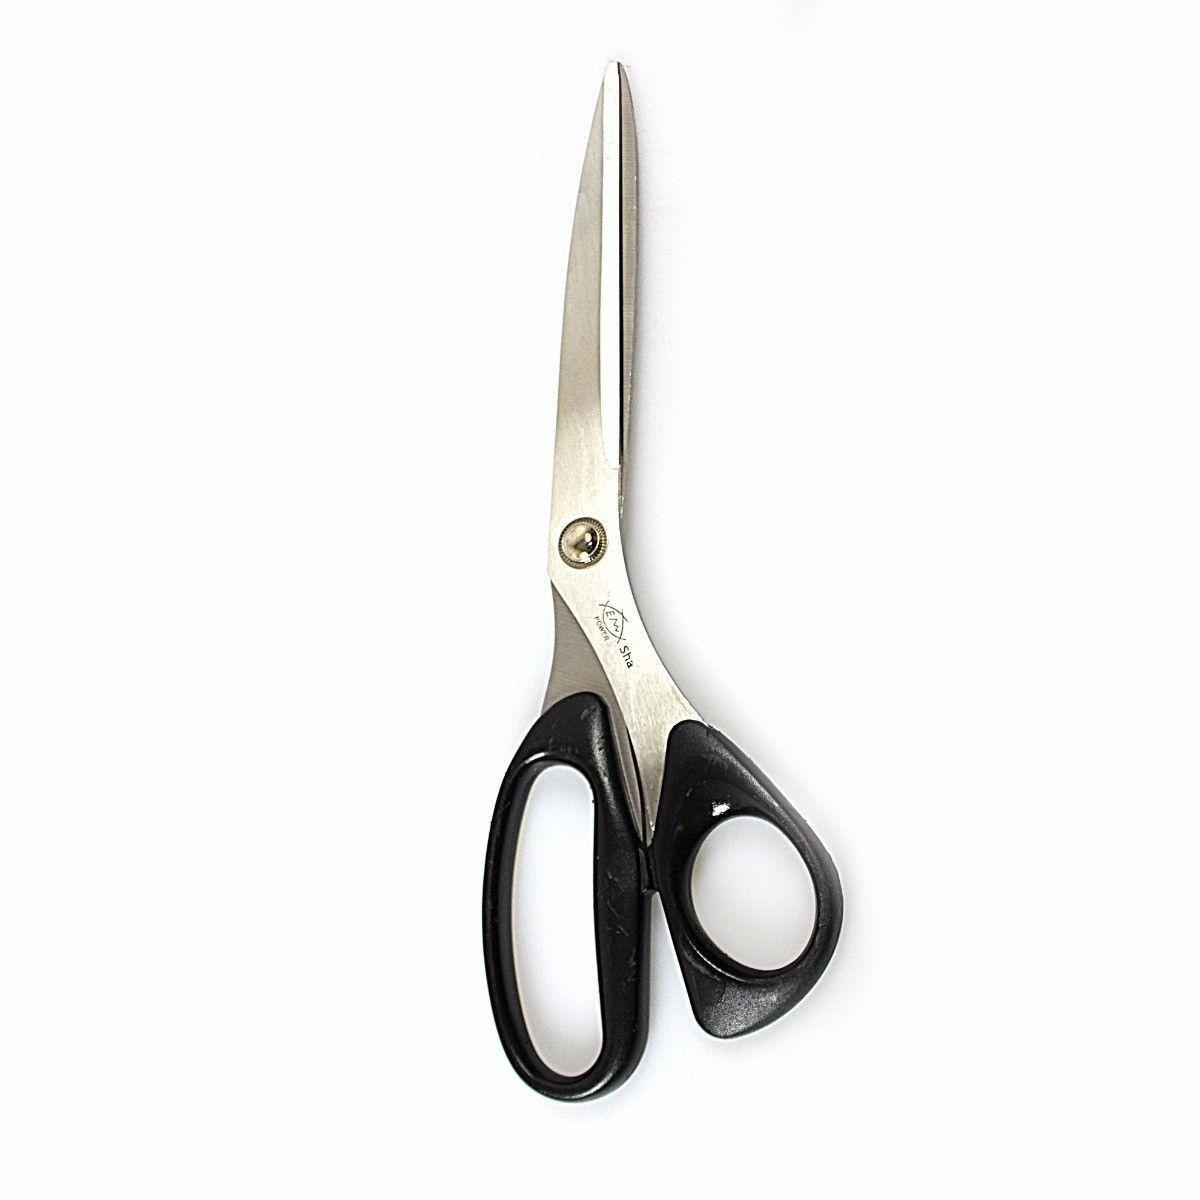 Stainless Steel ABS Handle Steel Blade Scissor 27cm 2794 (Large Letter Rate)